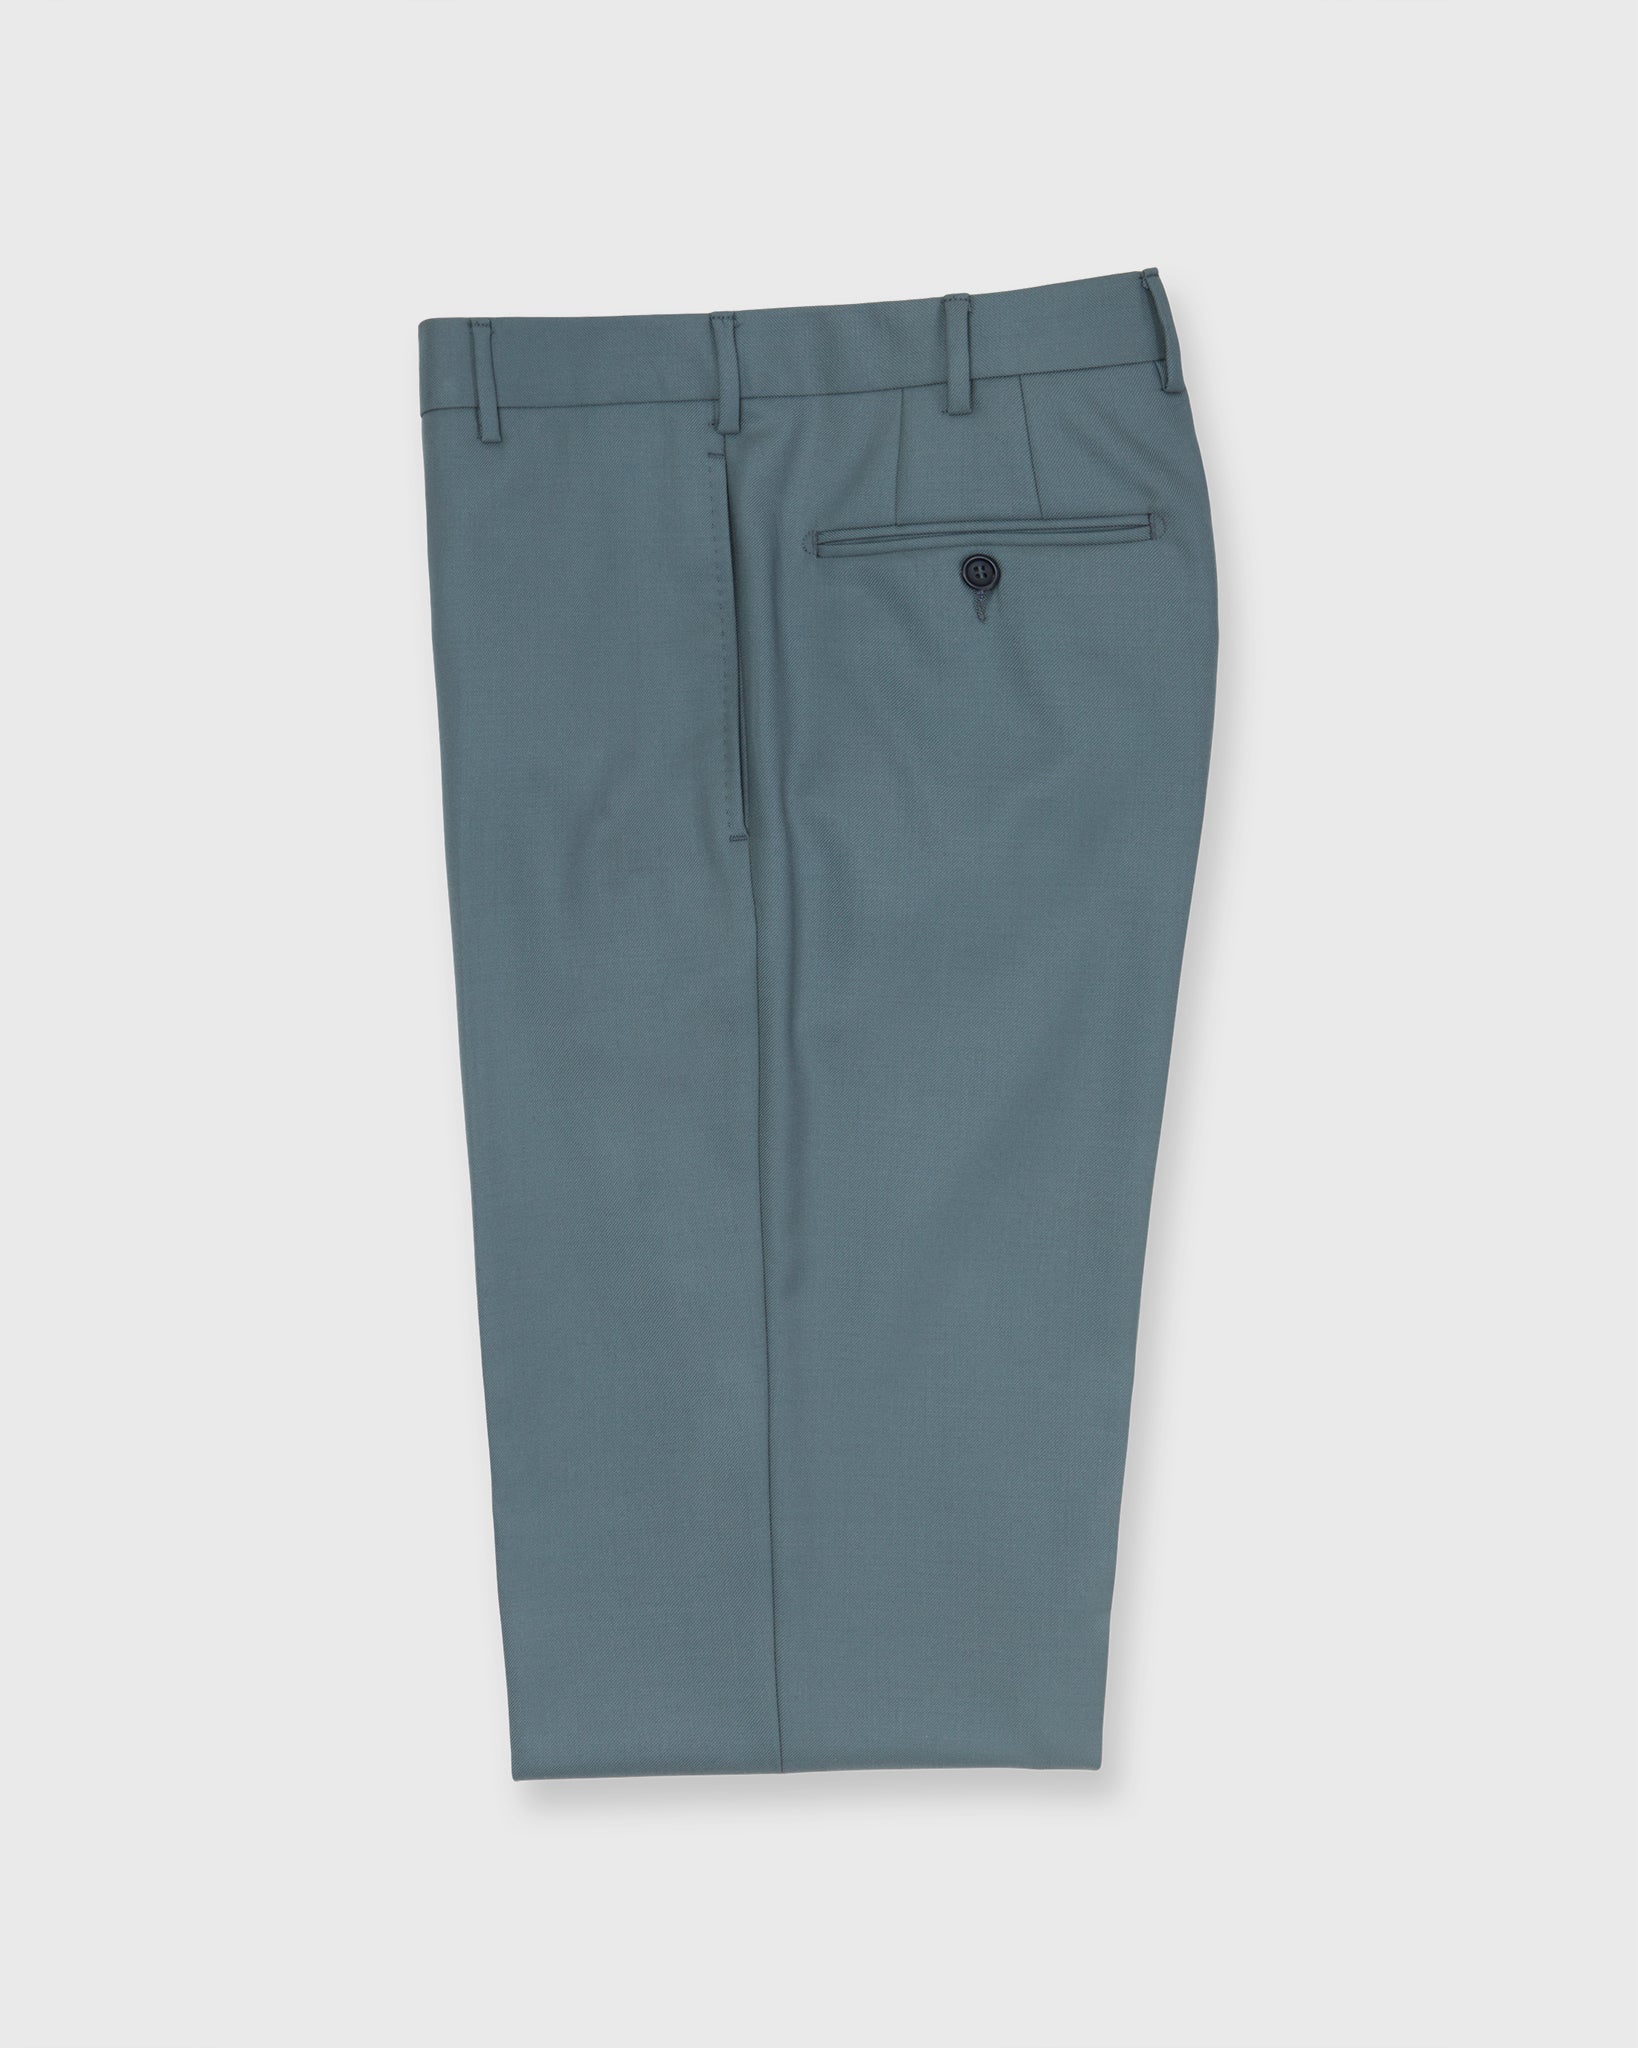 Dress Trouser in Sage Midweight Twill